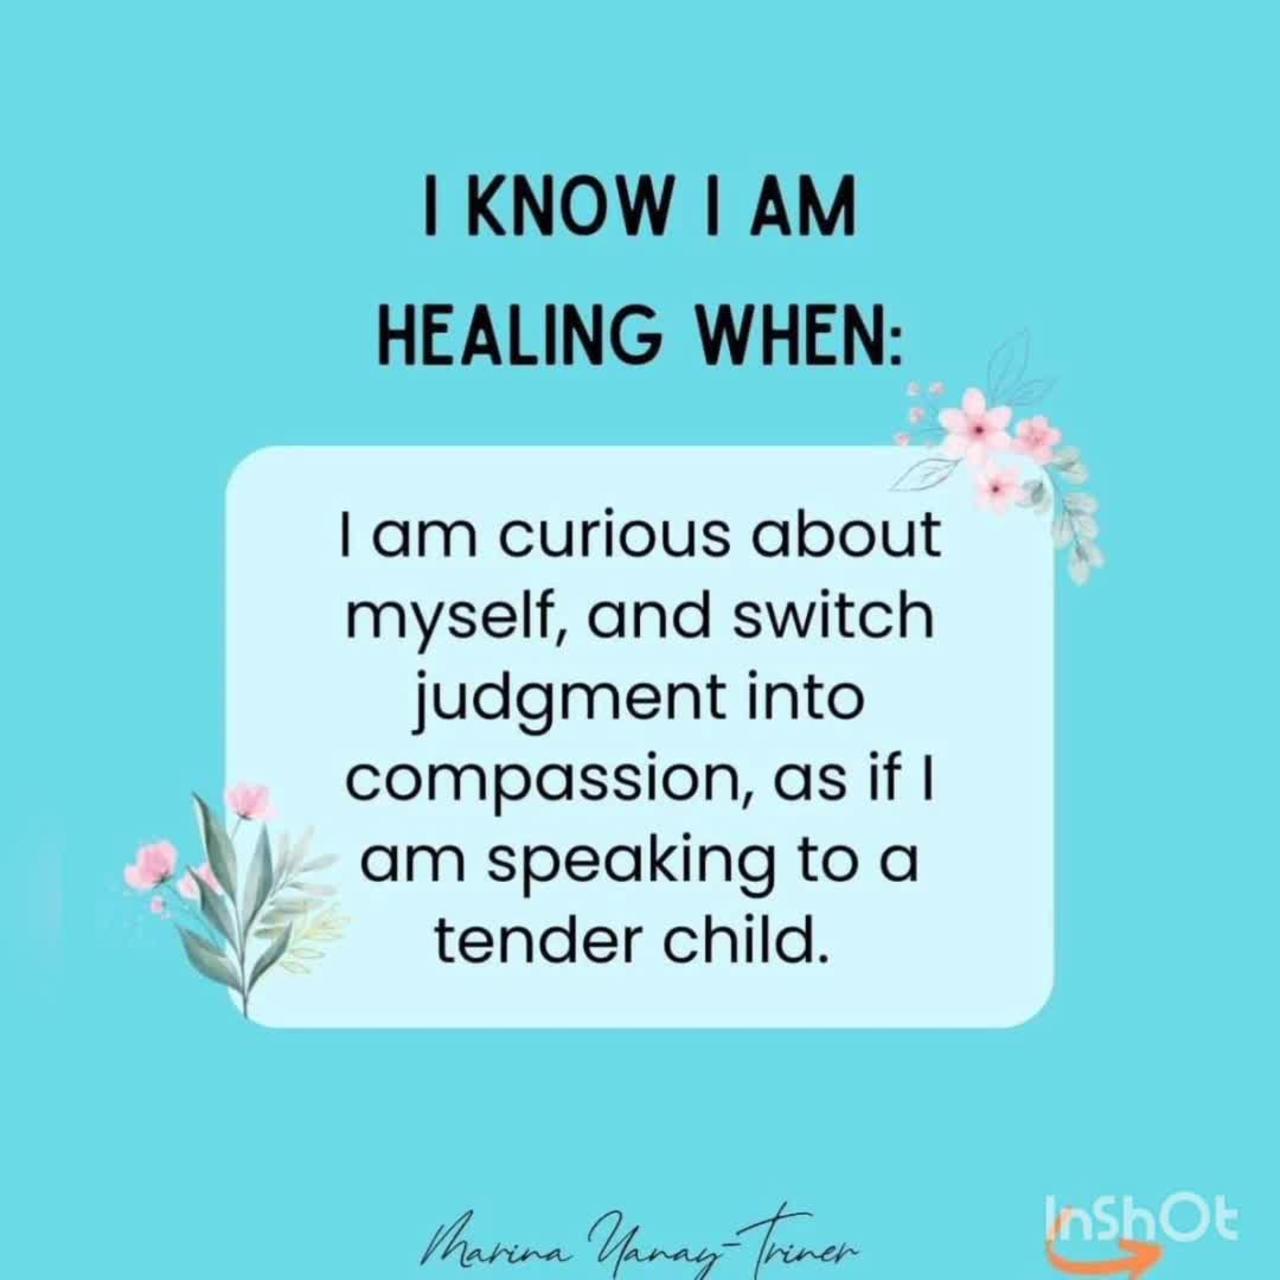 How do you know when you are healing?